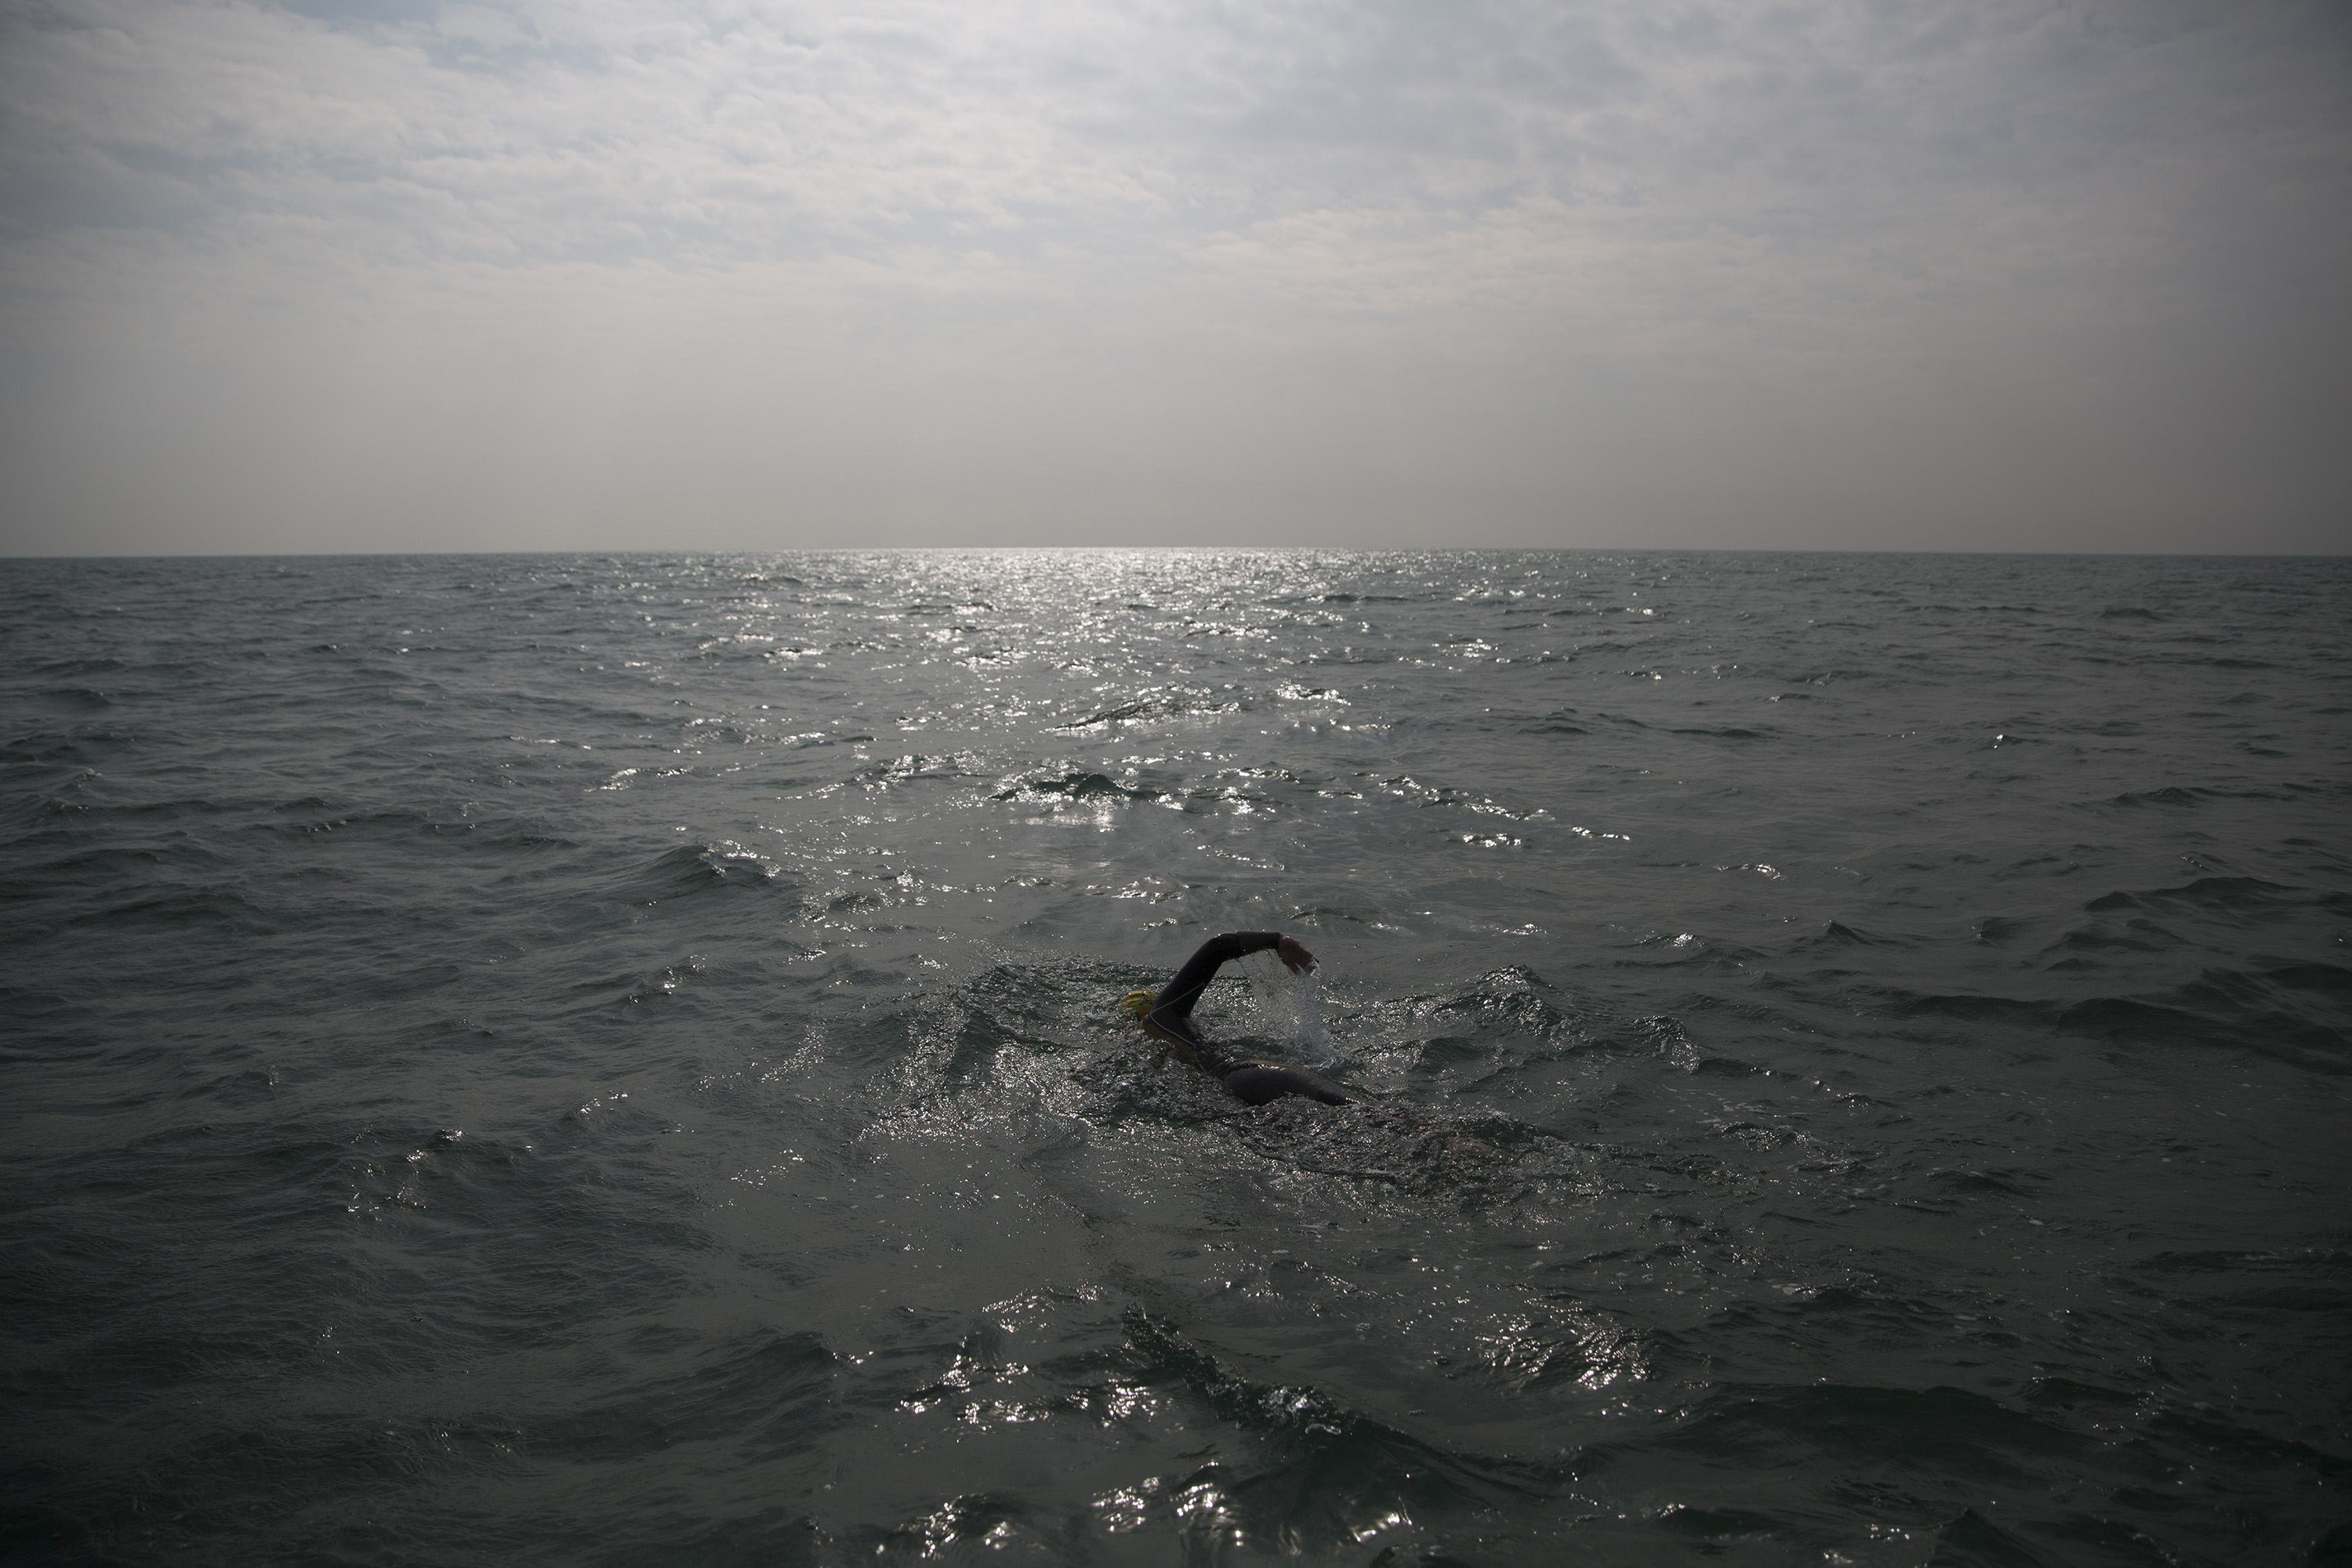 Paul Parrish swims as he takes part in the Arch to Arc triathlon in the channel between England and France September 15, 2014.